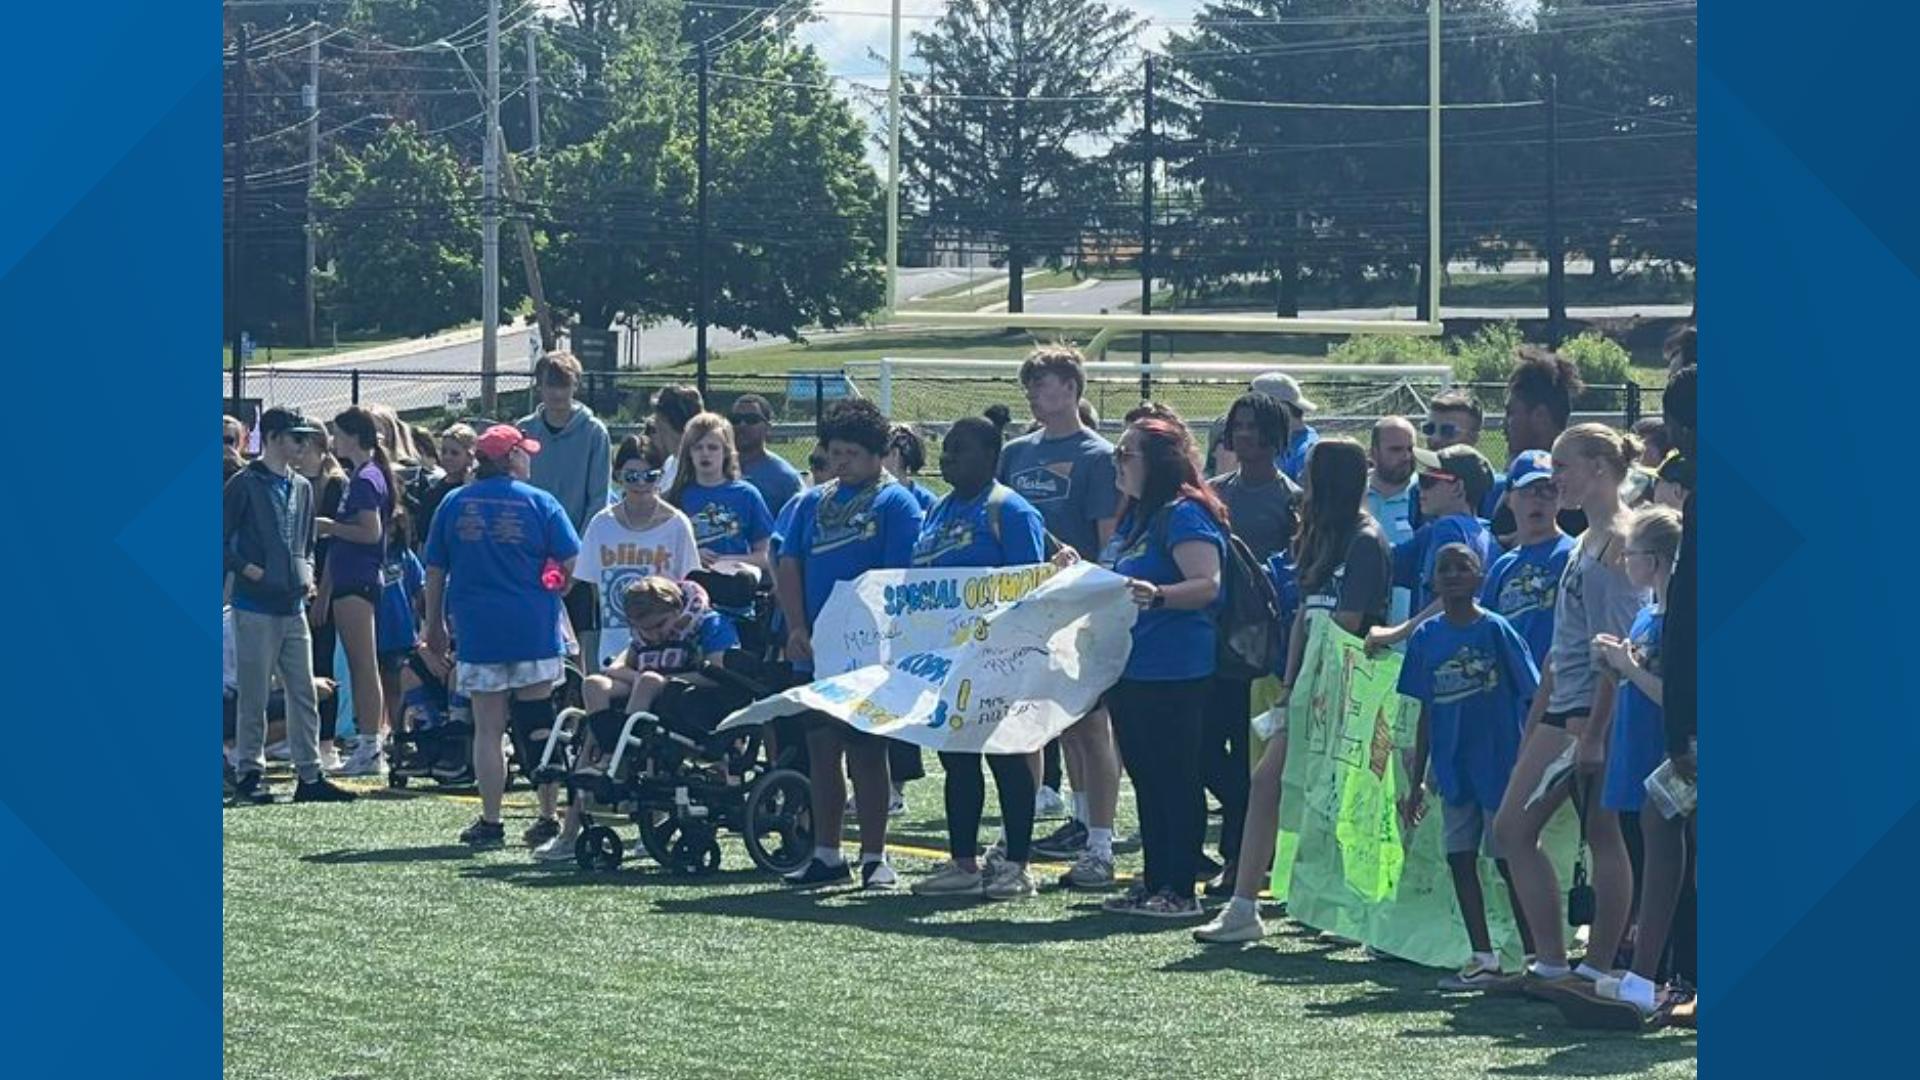 Students with varying disabilities, grades pre-K through 12, had the opportunity to compete in different games while their classmates cheered them on.